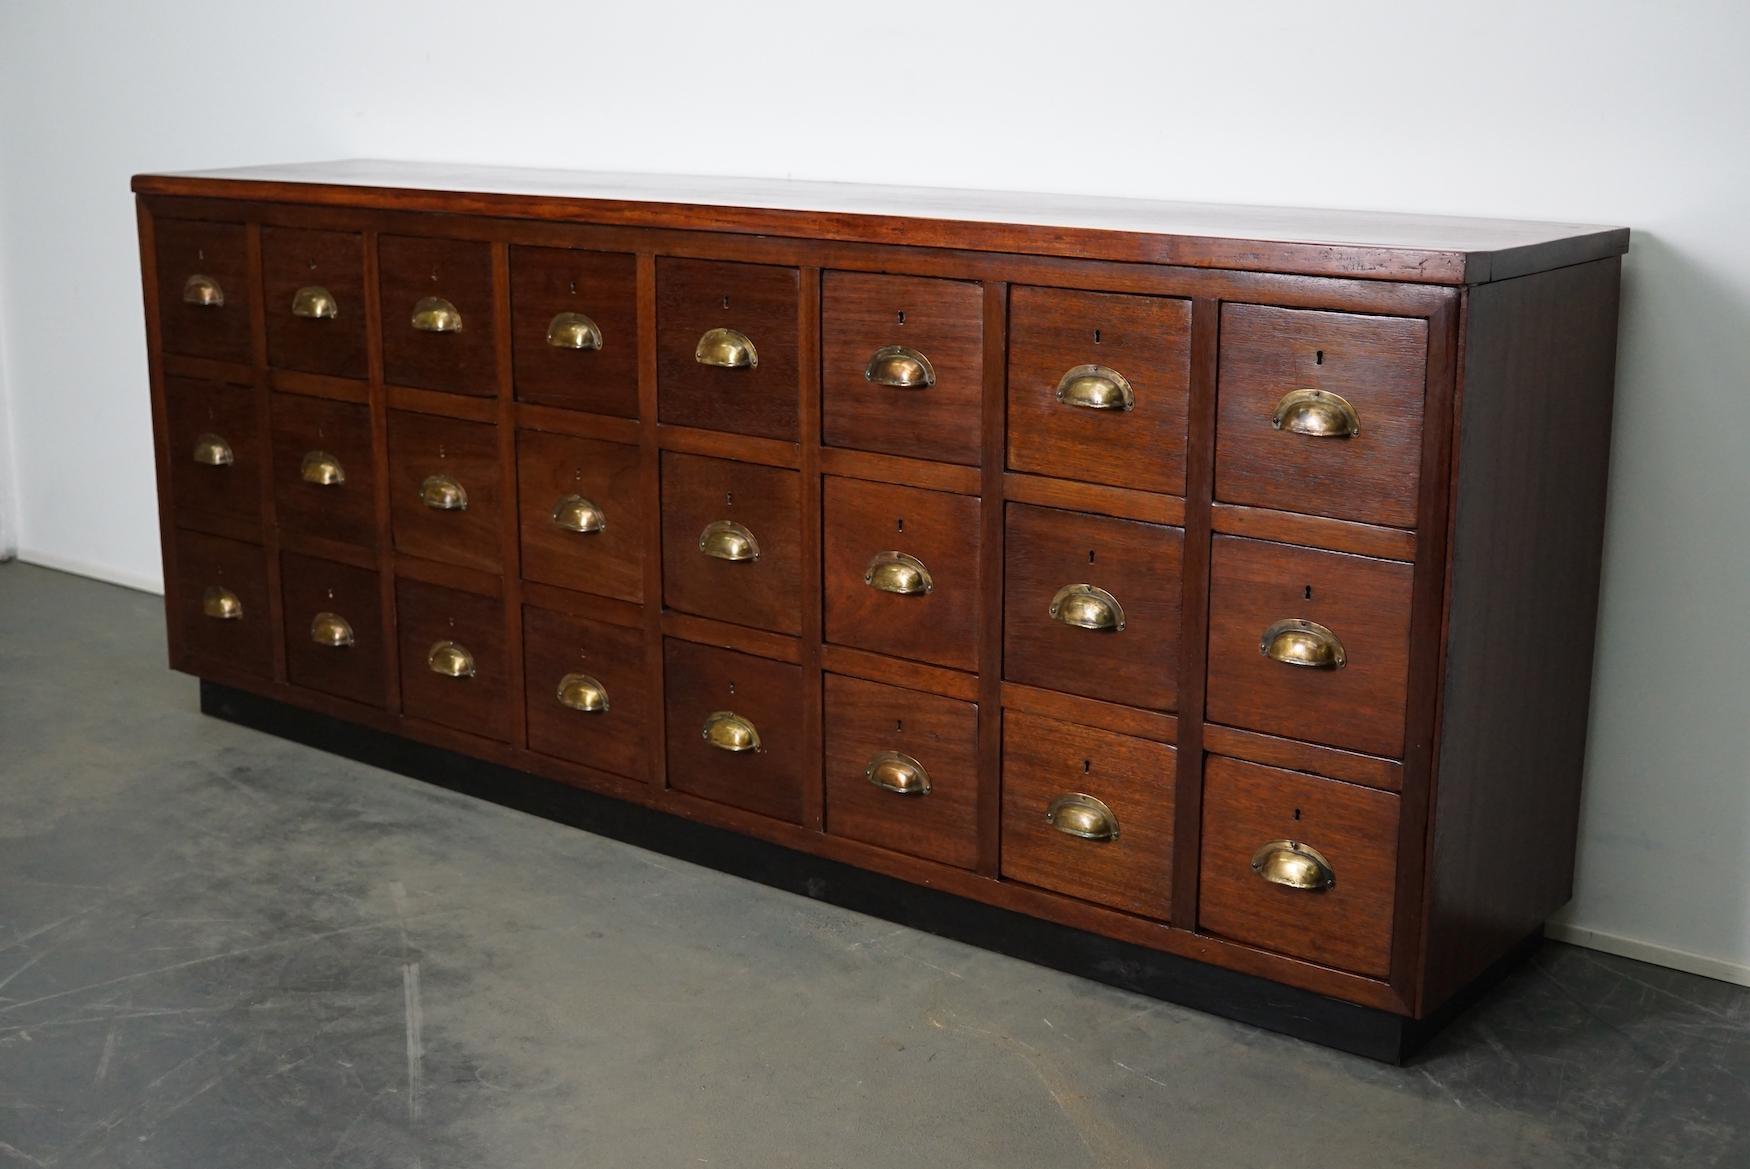 This vintage mahogany bank of drawers dates from the 1930s and was made in England. It features a mahogany frame, tropical hardwood top and drawers with mahogany fronts and brass cup handles. There are no keys of the drawers present.